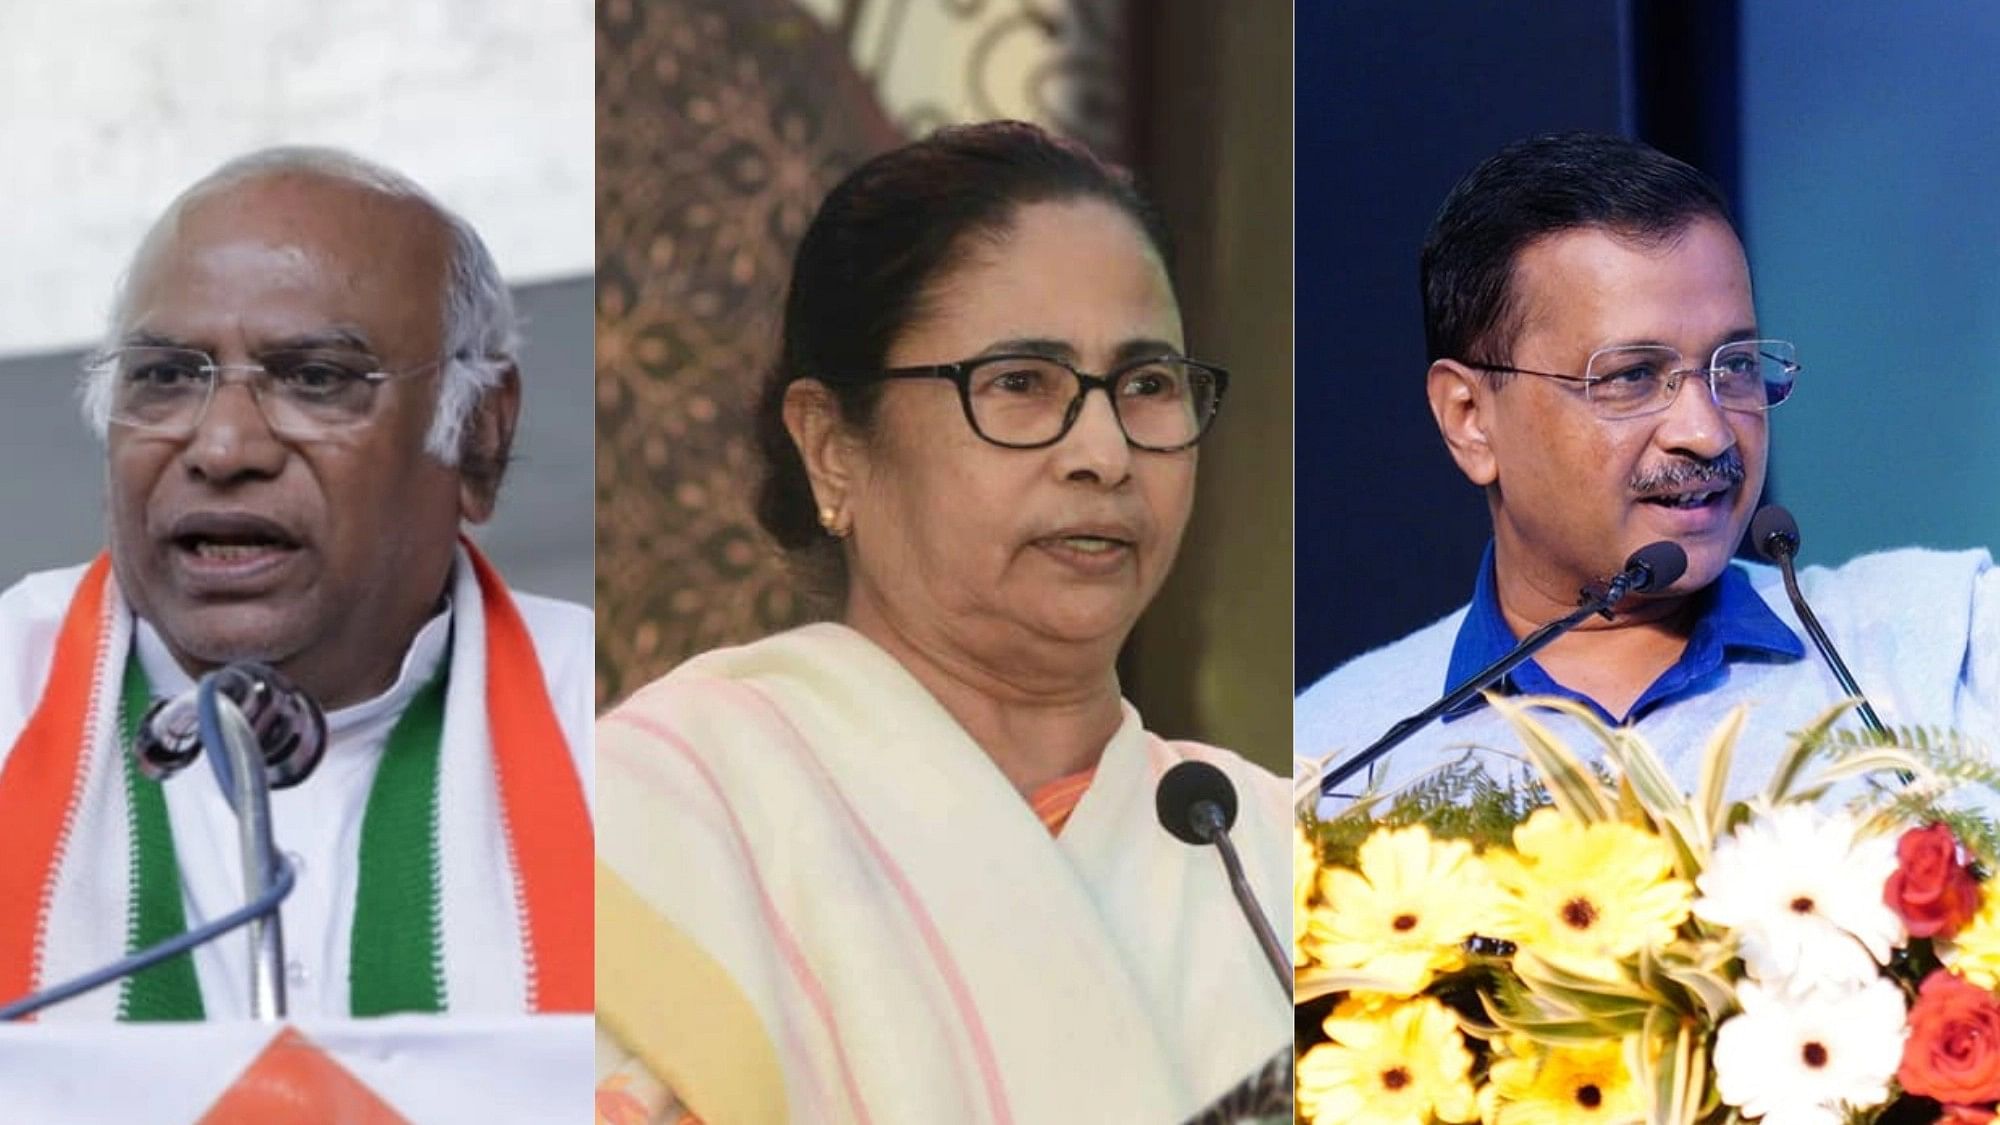 <div class="paragraphs"><p>From left to right:&nbsp;Mallikarjun Kharge, Mamata Banerjee, and Arvind Kejriwal.&nbsp;</p></div>